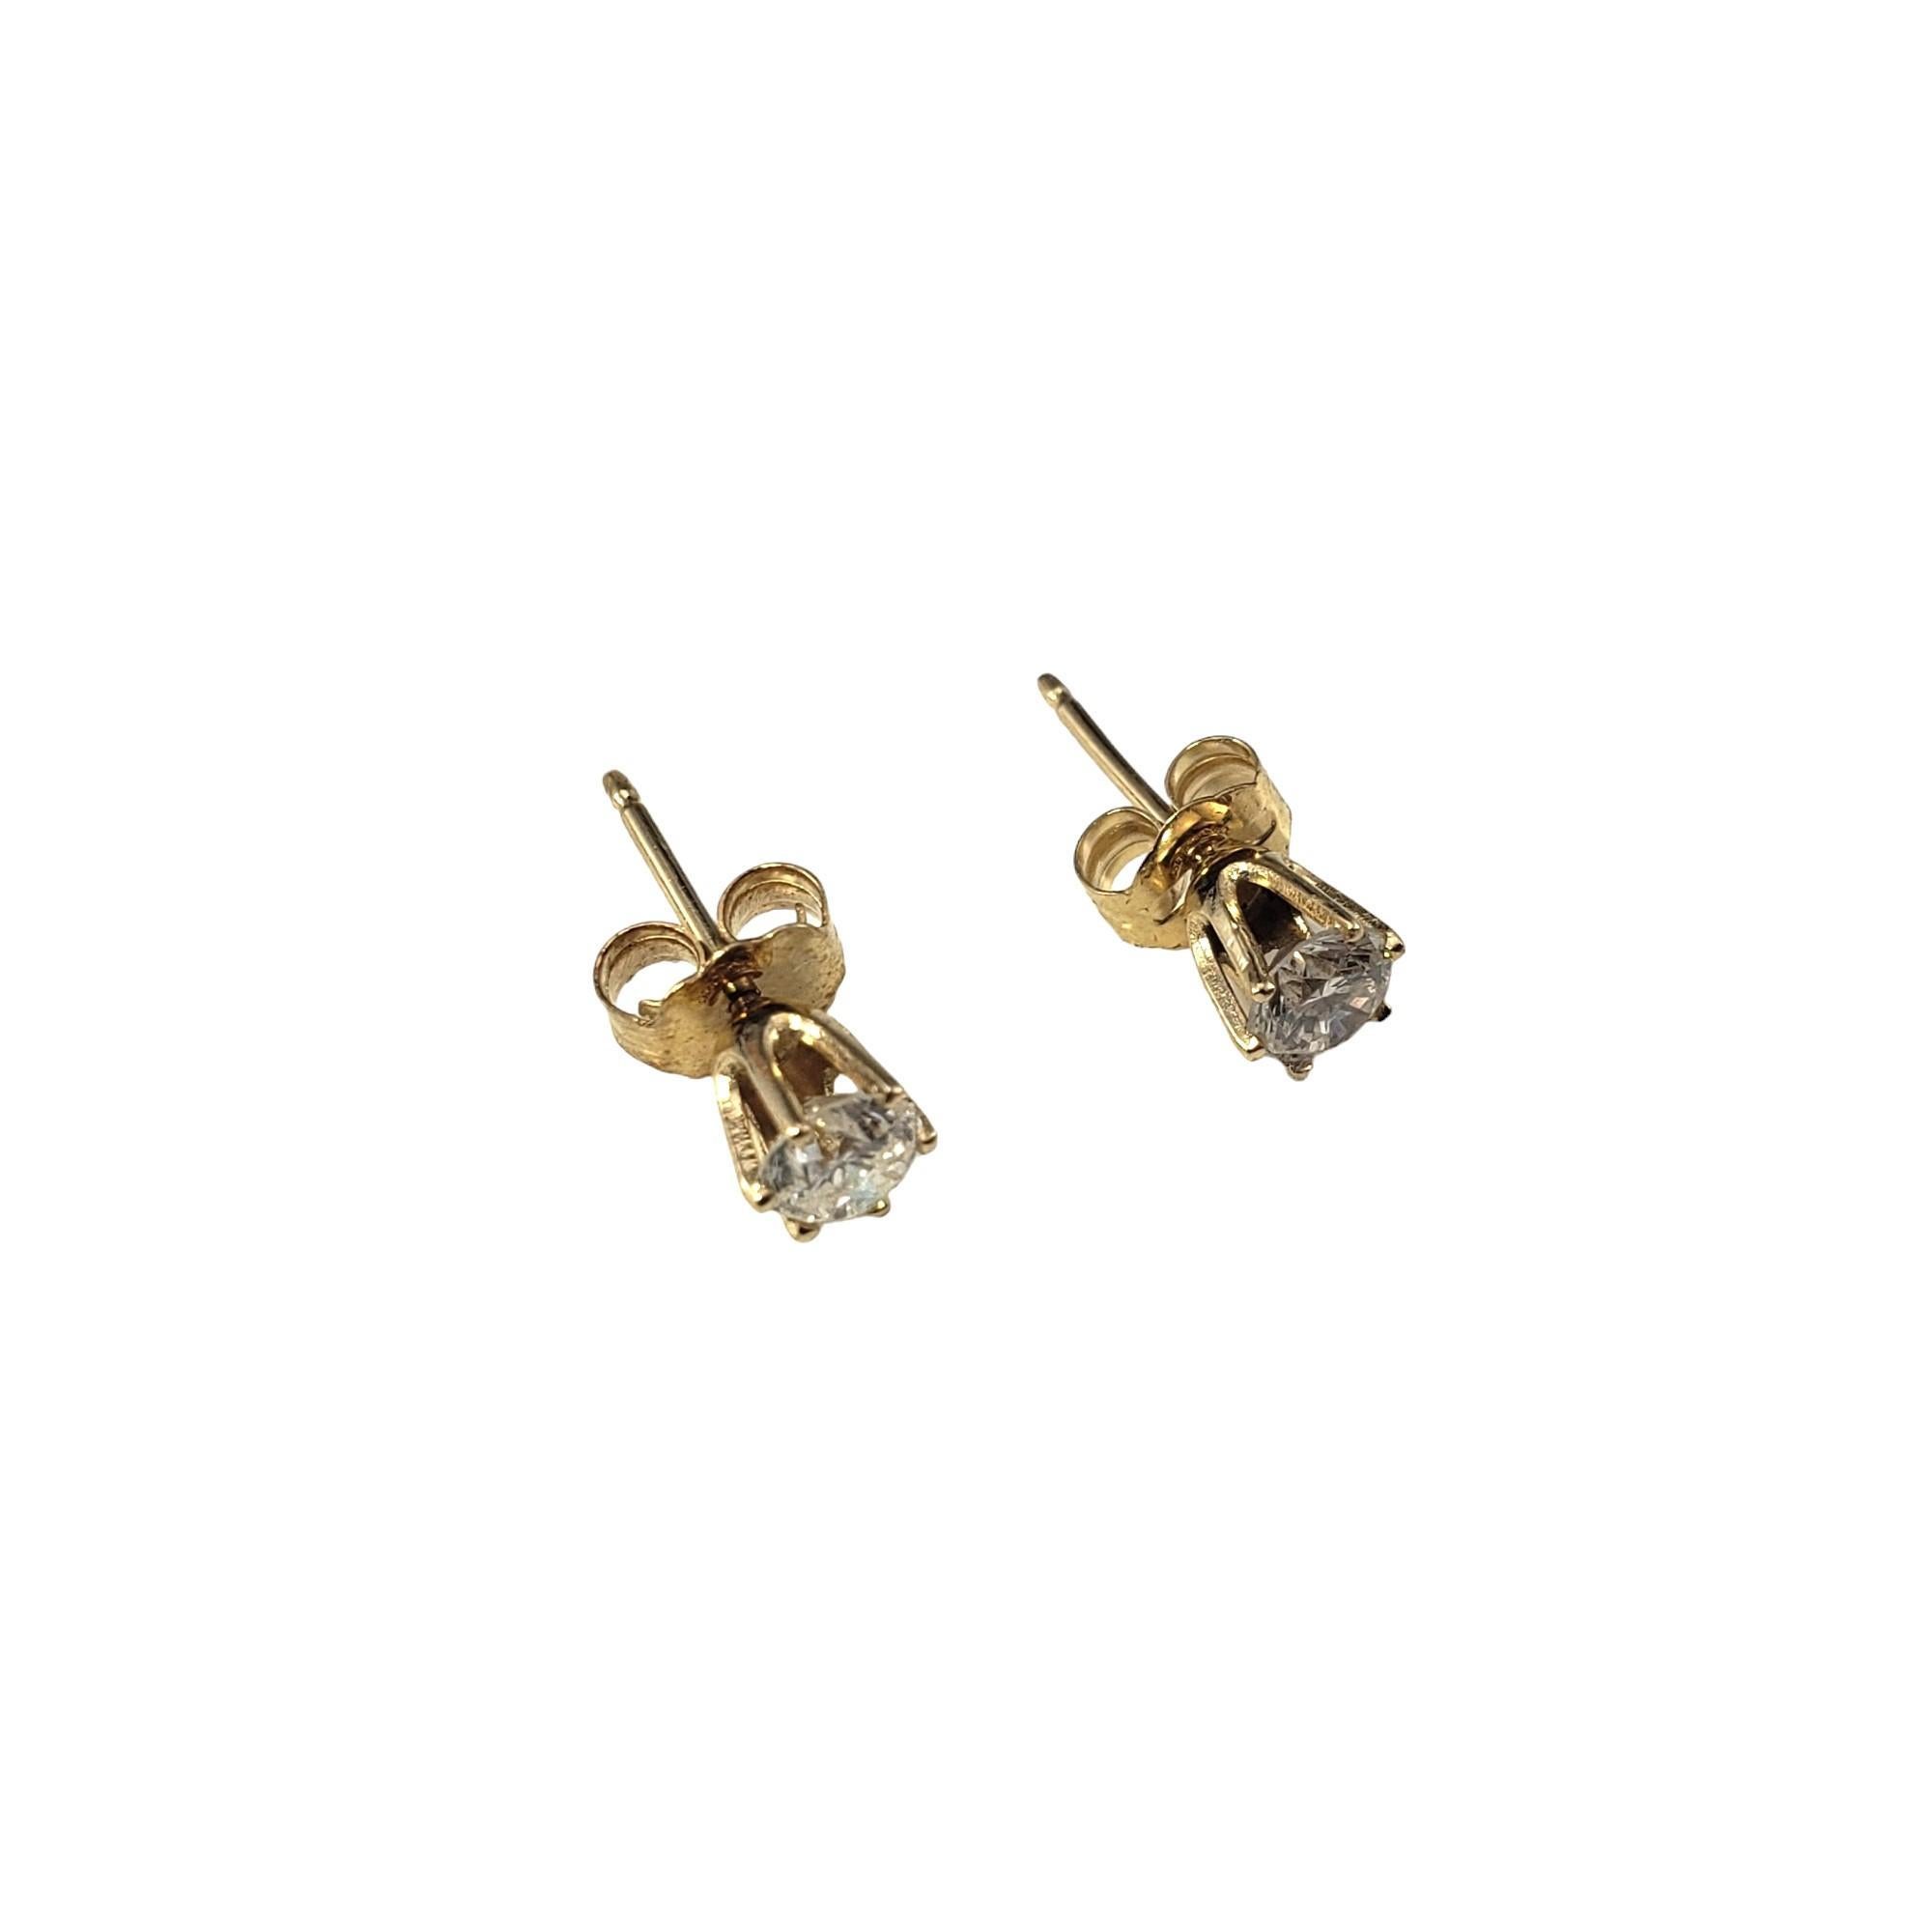 Round Cut 14K Yellow Gold Diamond Stud Earrings #16385 For Sale